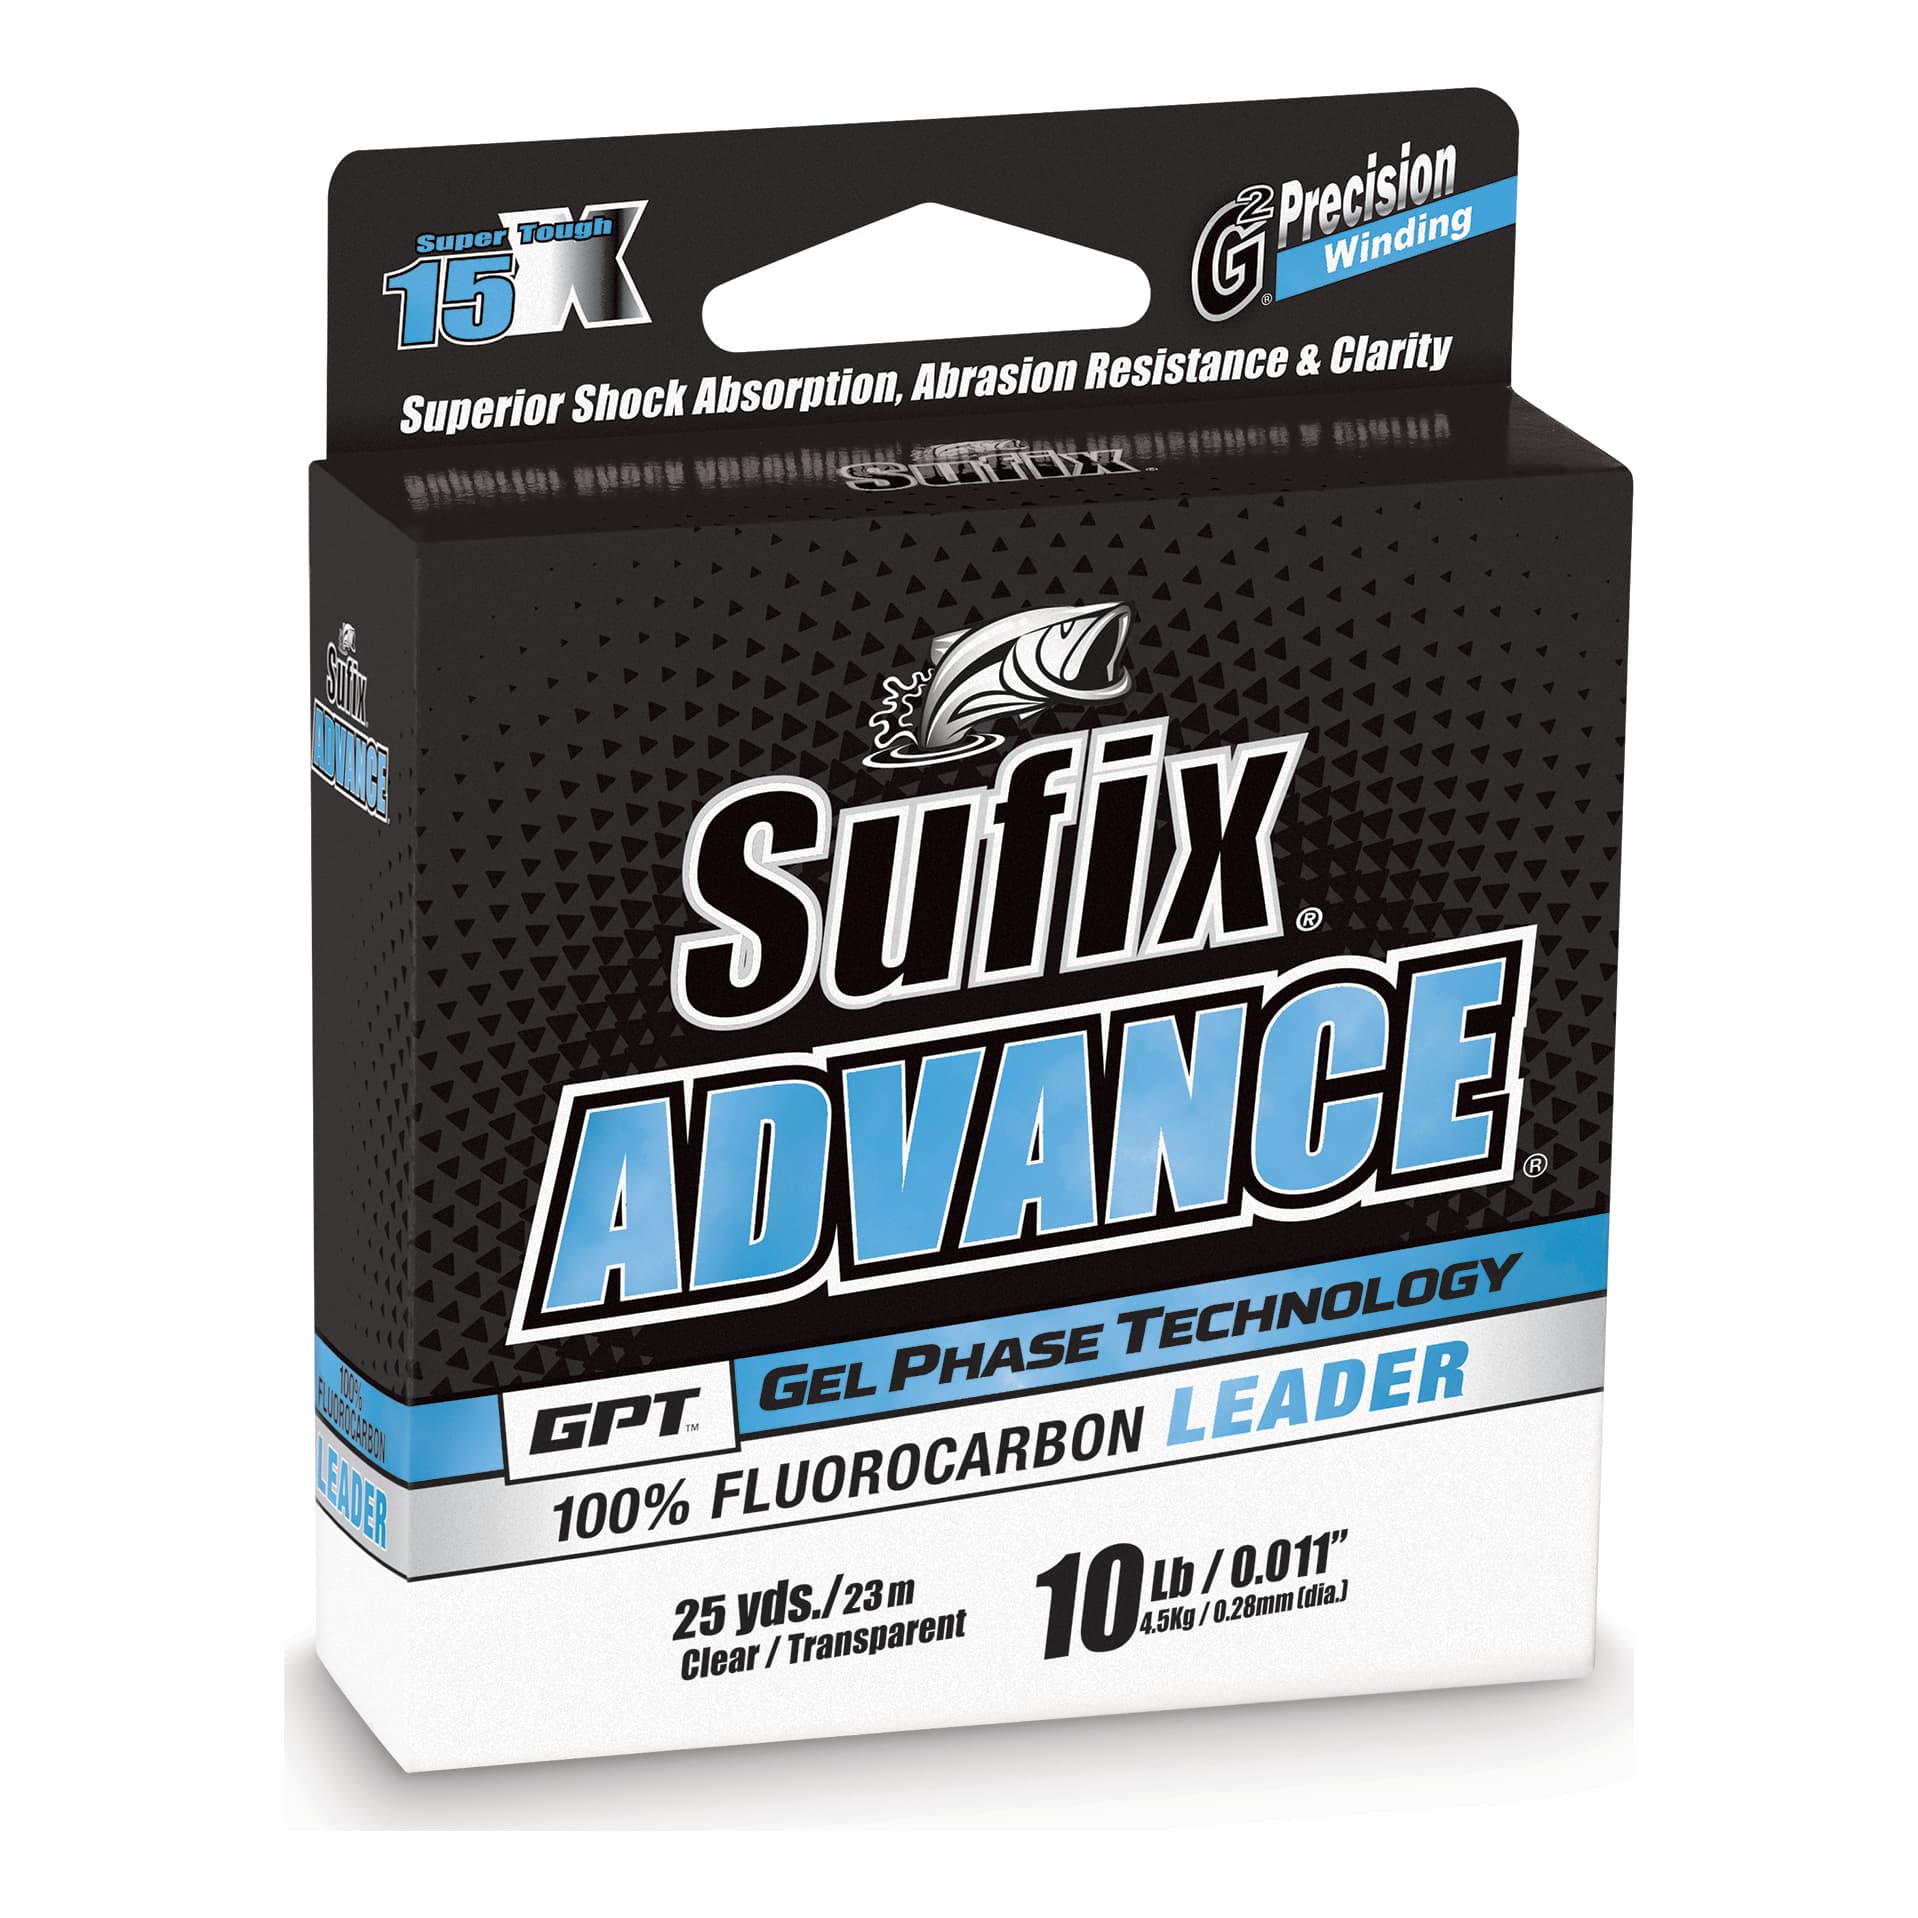 Sufix ProMix Braid 15lb Line  Up to 12% Off Free Shipping over $49!